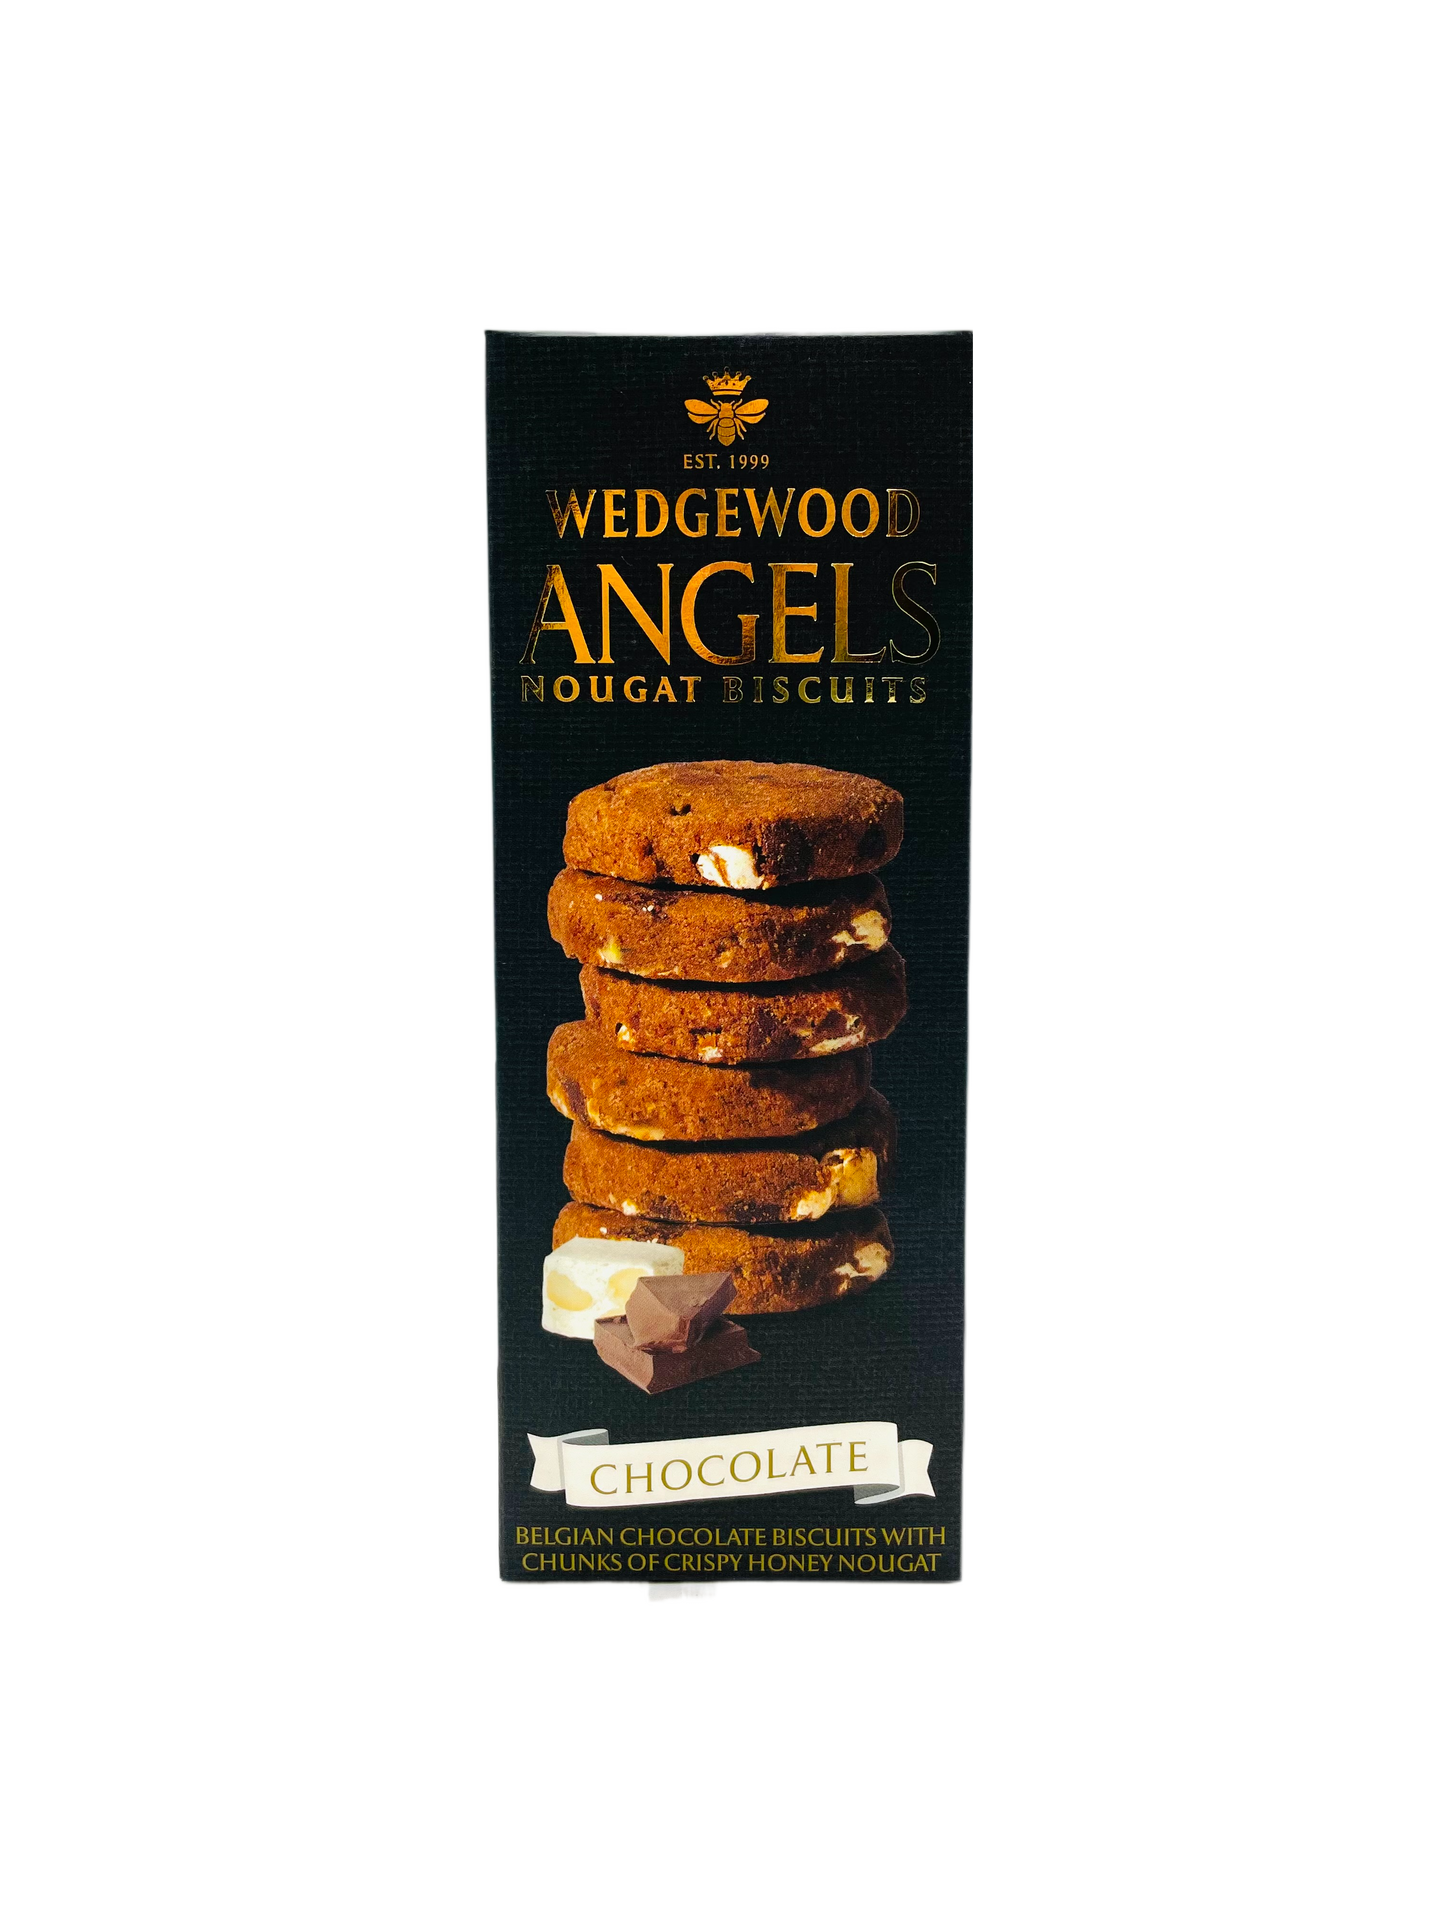 Wedgewood Angels Nougat Biscuits Chocolate Flavoured 150g